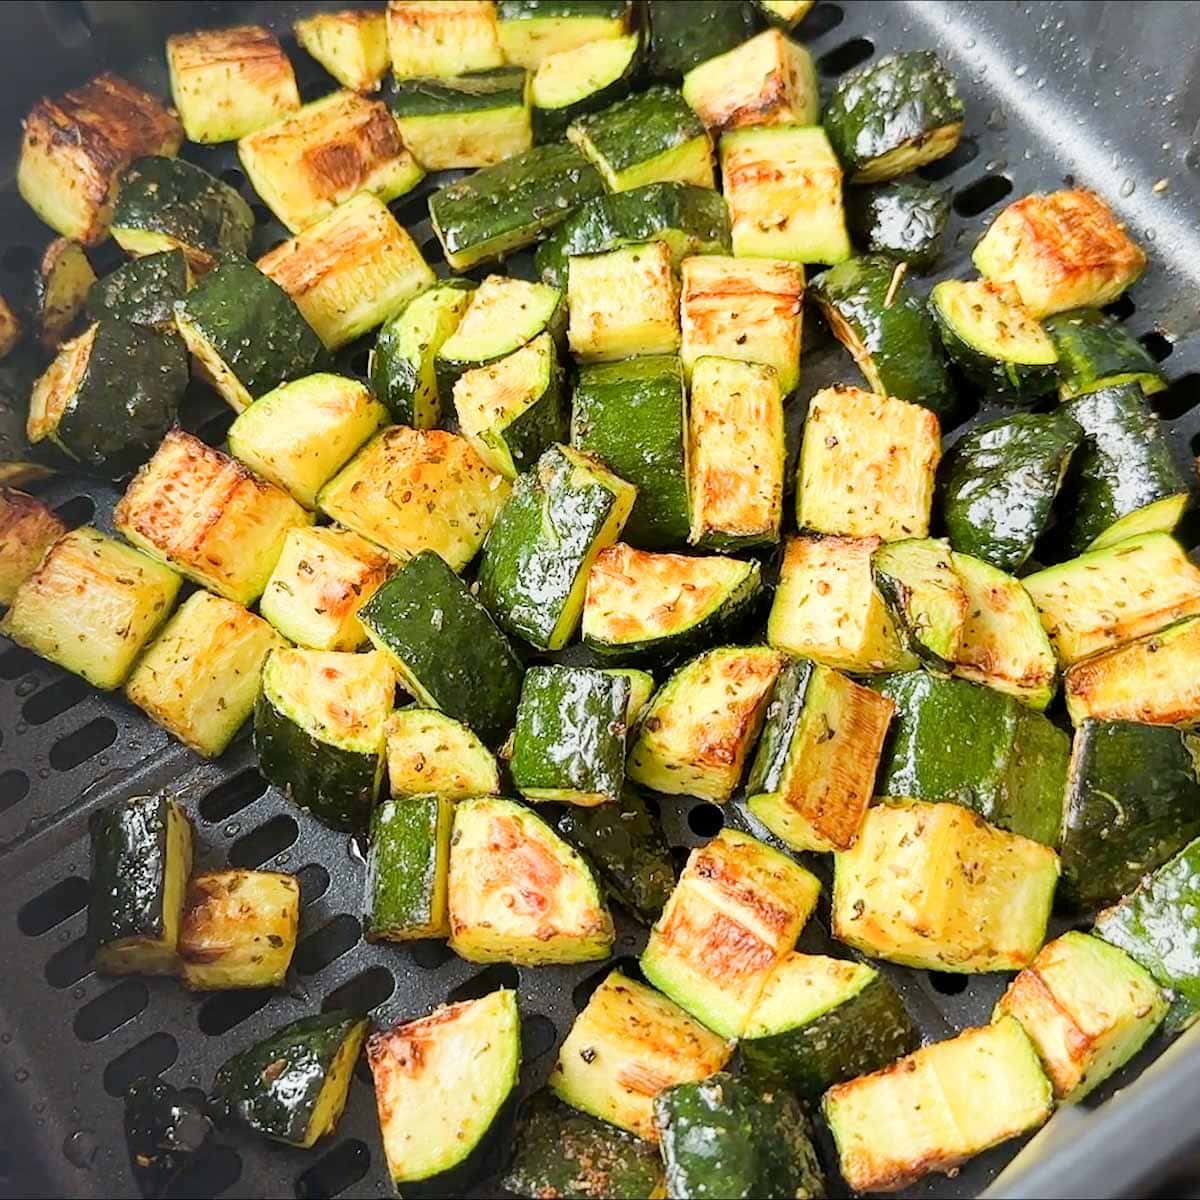 Roasted Zucchini in Air fryer